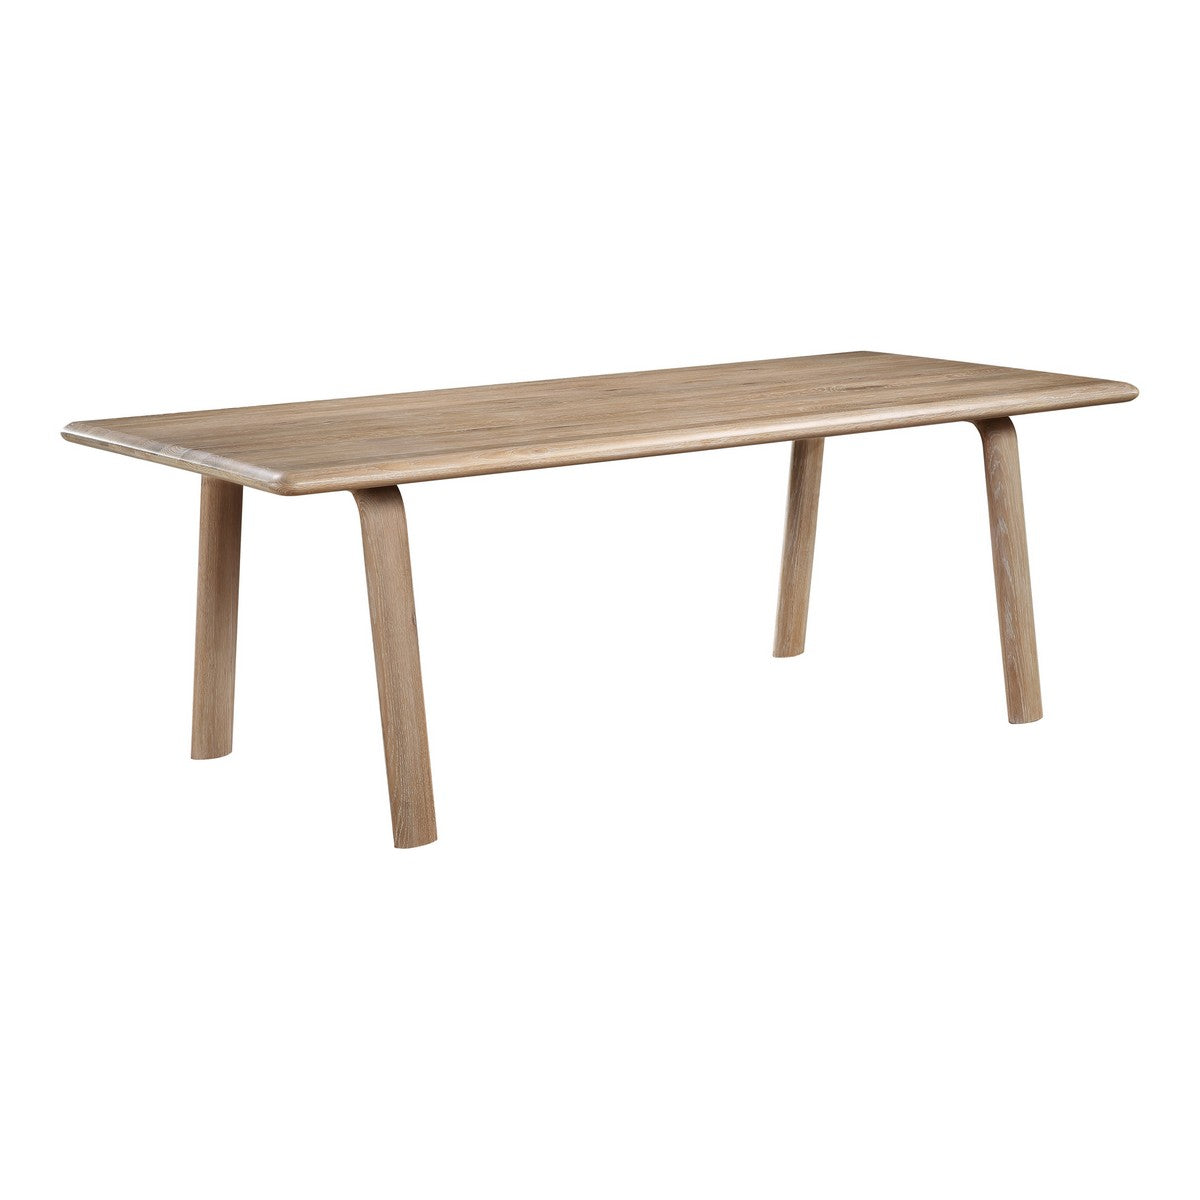 Moe's Home Collection Malibu Dining Table White Oak - BC-1046-18 - Moe's Home Collection - Dining Tables - Minimal And Modern - 1